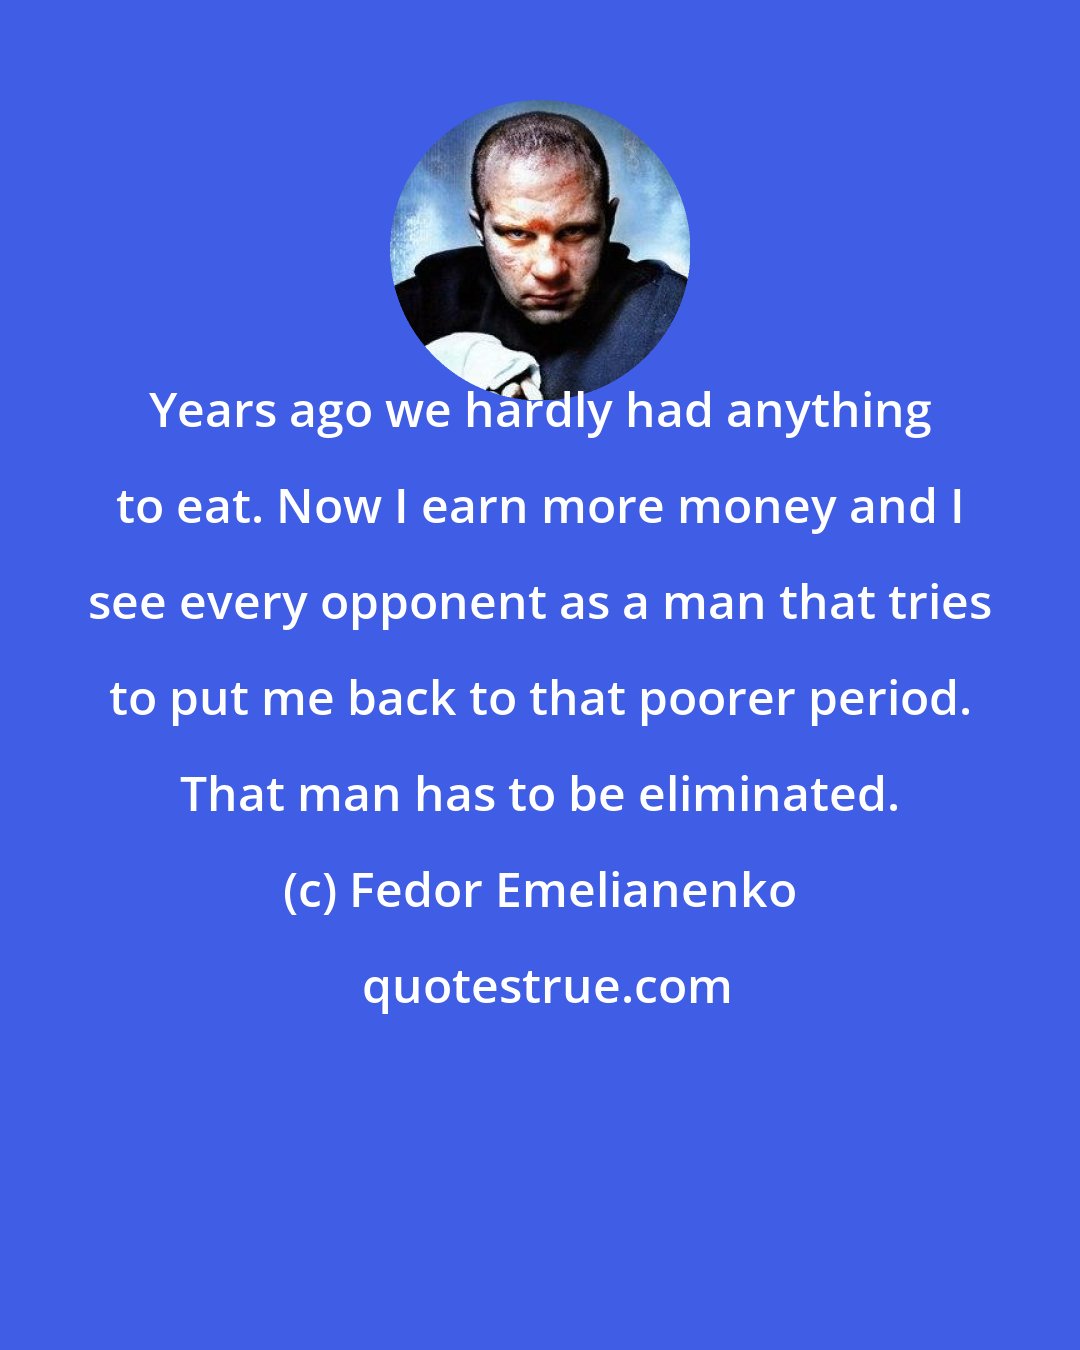 Fedor Emelianenko: Years ago we hardly had anything to eat. Now I earn more money and I see every opponent as a man that tries to put me back to that poorer period. That man has to be eliminated.